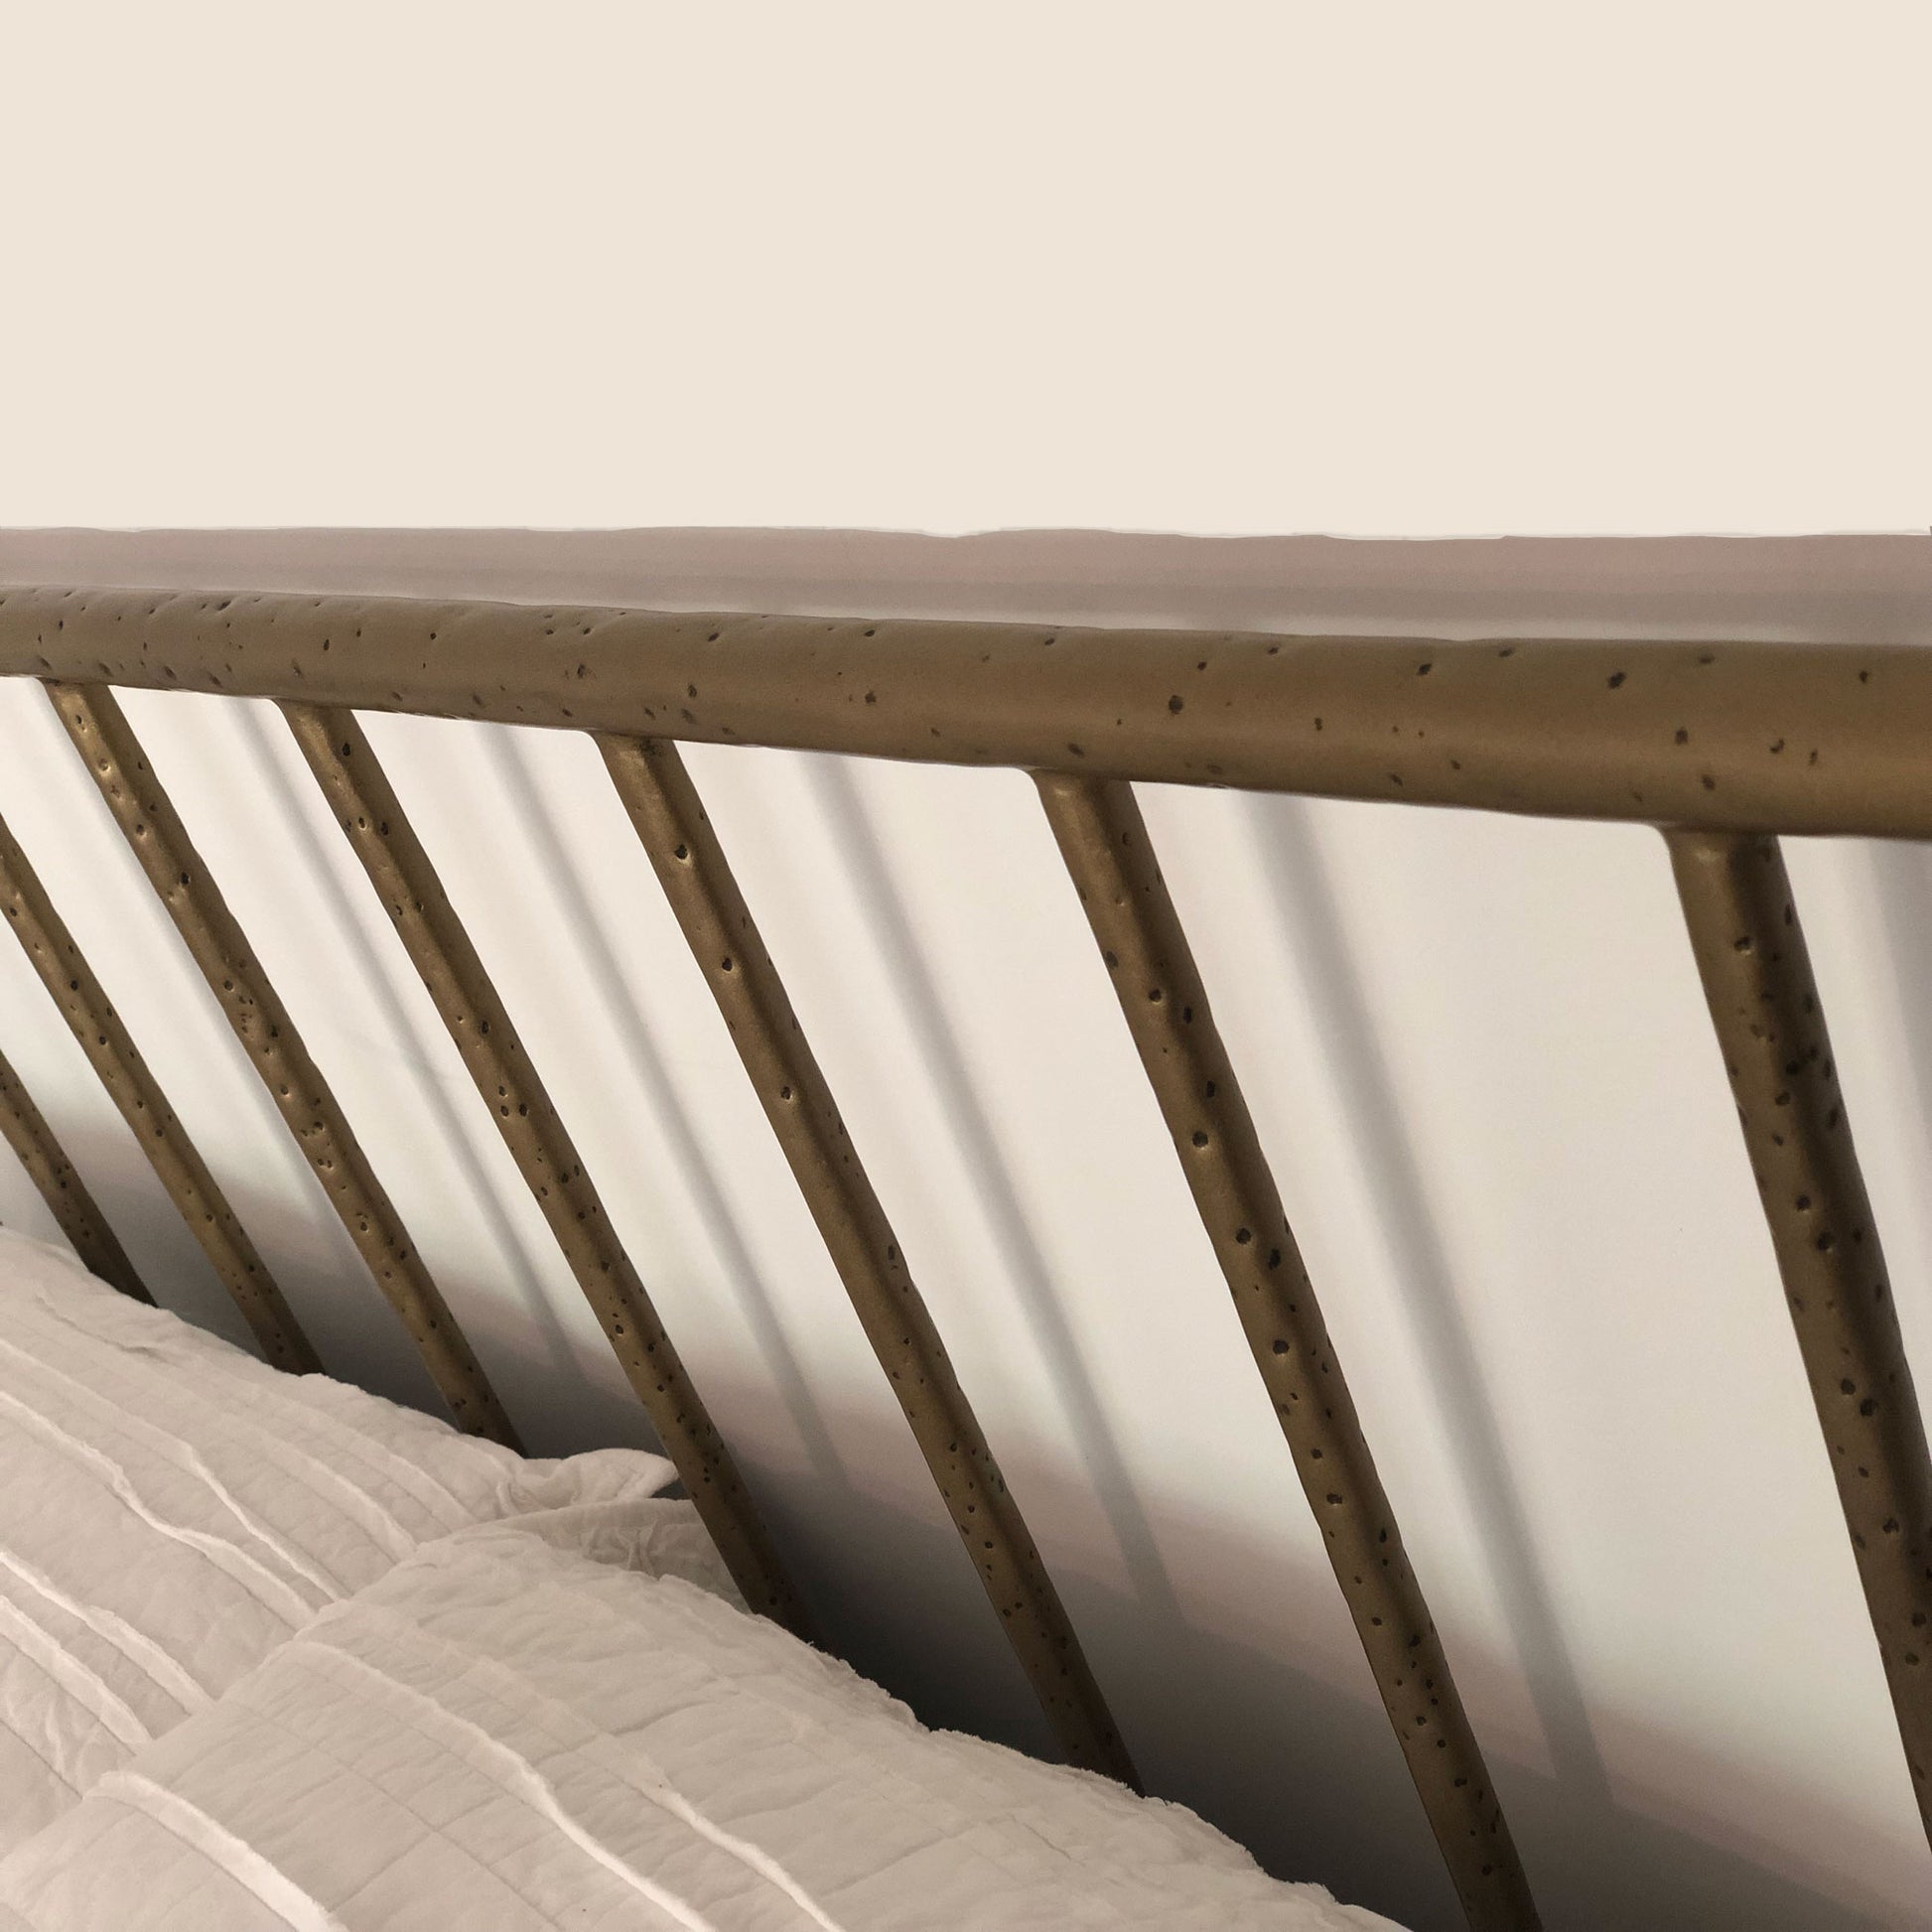 Archaeo Pitted Brass Hammered Iron Platform Bed by Heiressy closeup high-end luxury hammered iron headboard texture furniture.